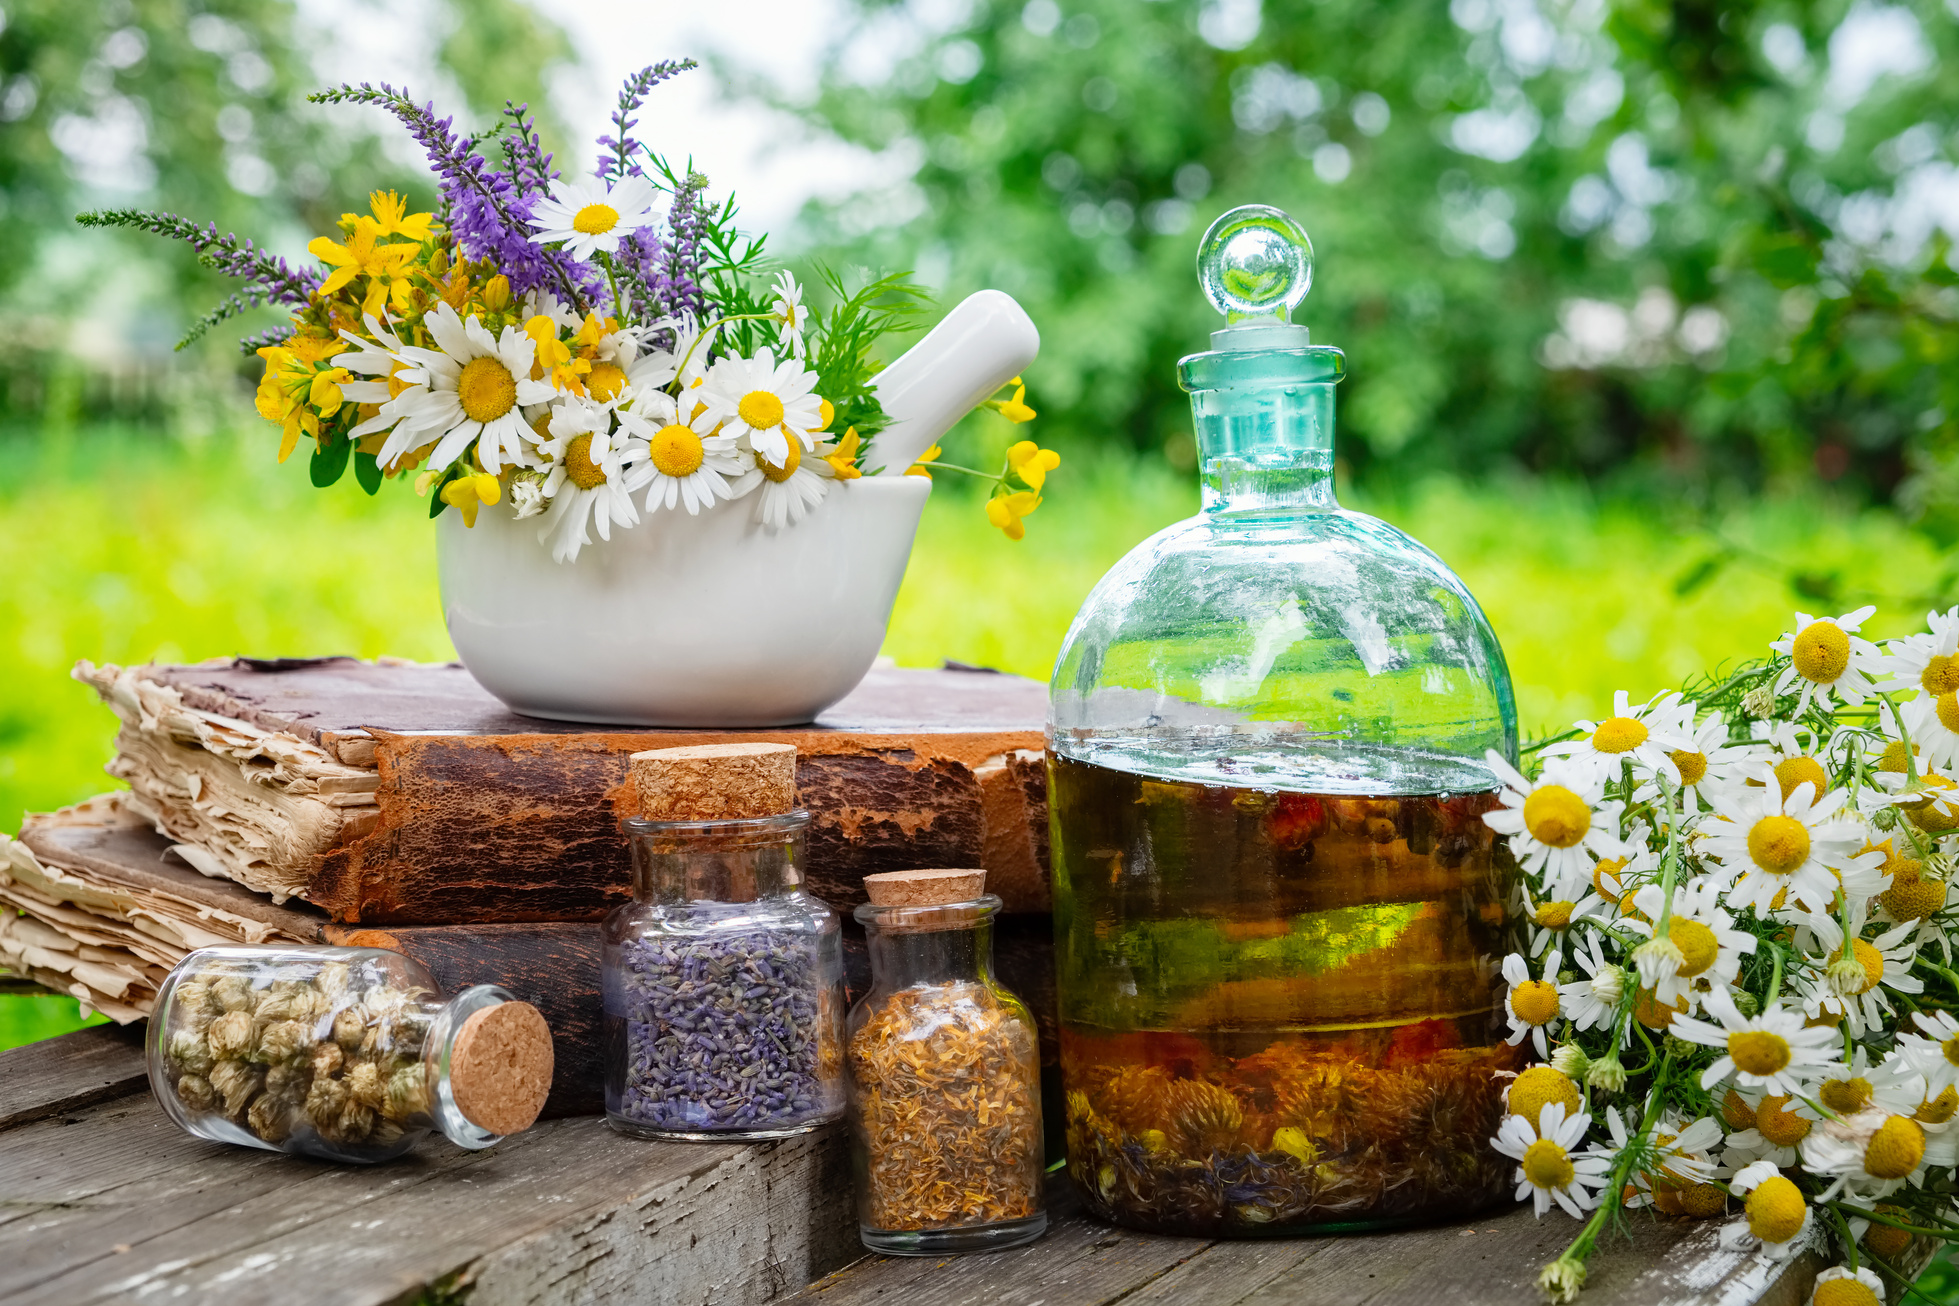 Mortar of Healing Herbs and Bottles of Healthy Essential Oil